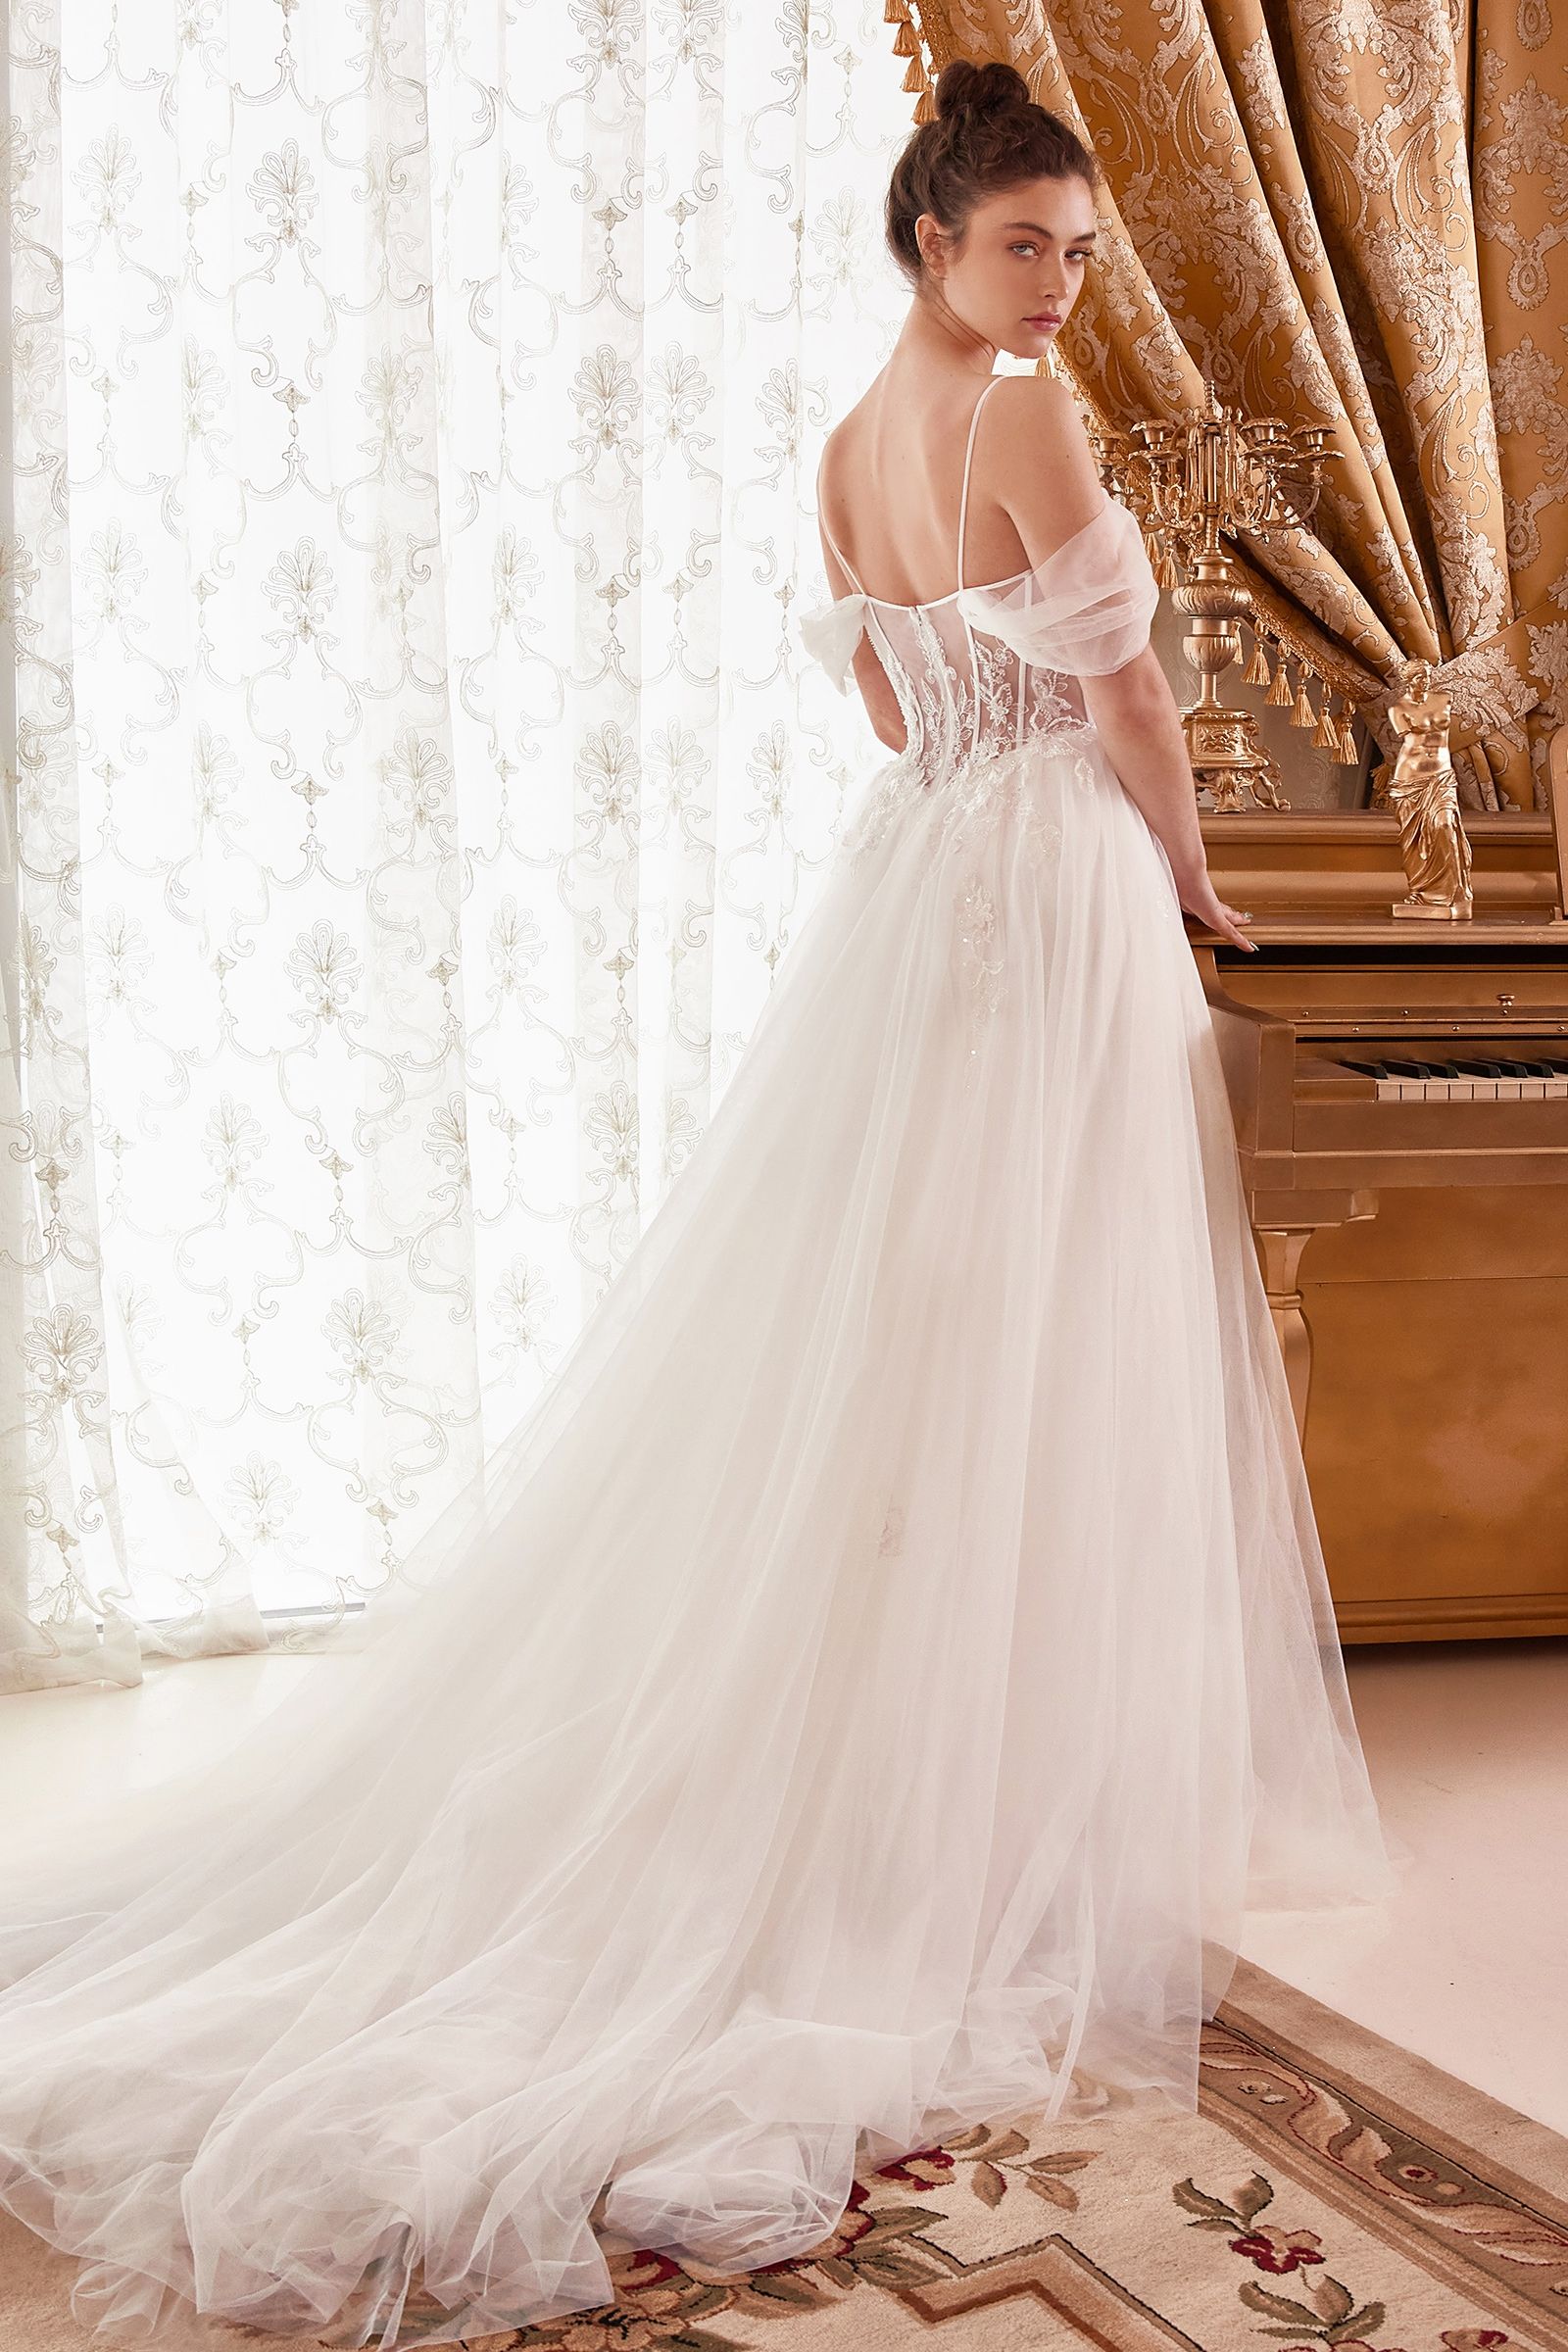 Feel truly magical on your special day with Ladivine WN307 A Line Tulle off the shoulder Sheer Corset Wedding Dress. Featuring a stunning off-the-shoulder draped sleeves sweetheart neckline look, the sheer boned corset bodice and intricate lace appliques make this dress the perfect choice for a timeless, yet contemporary style. 